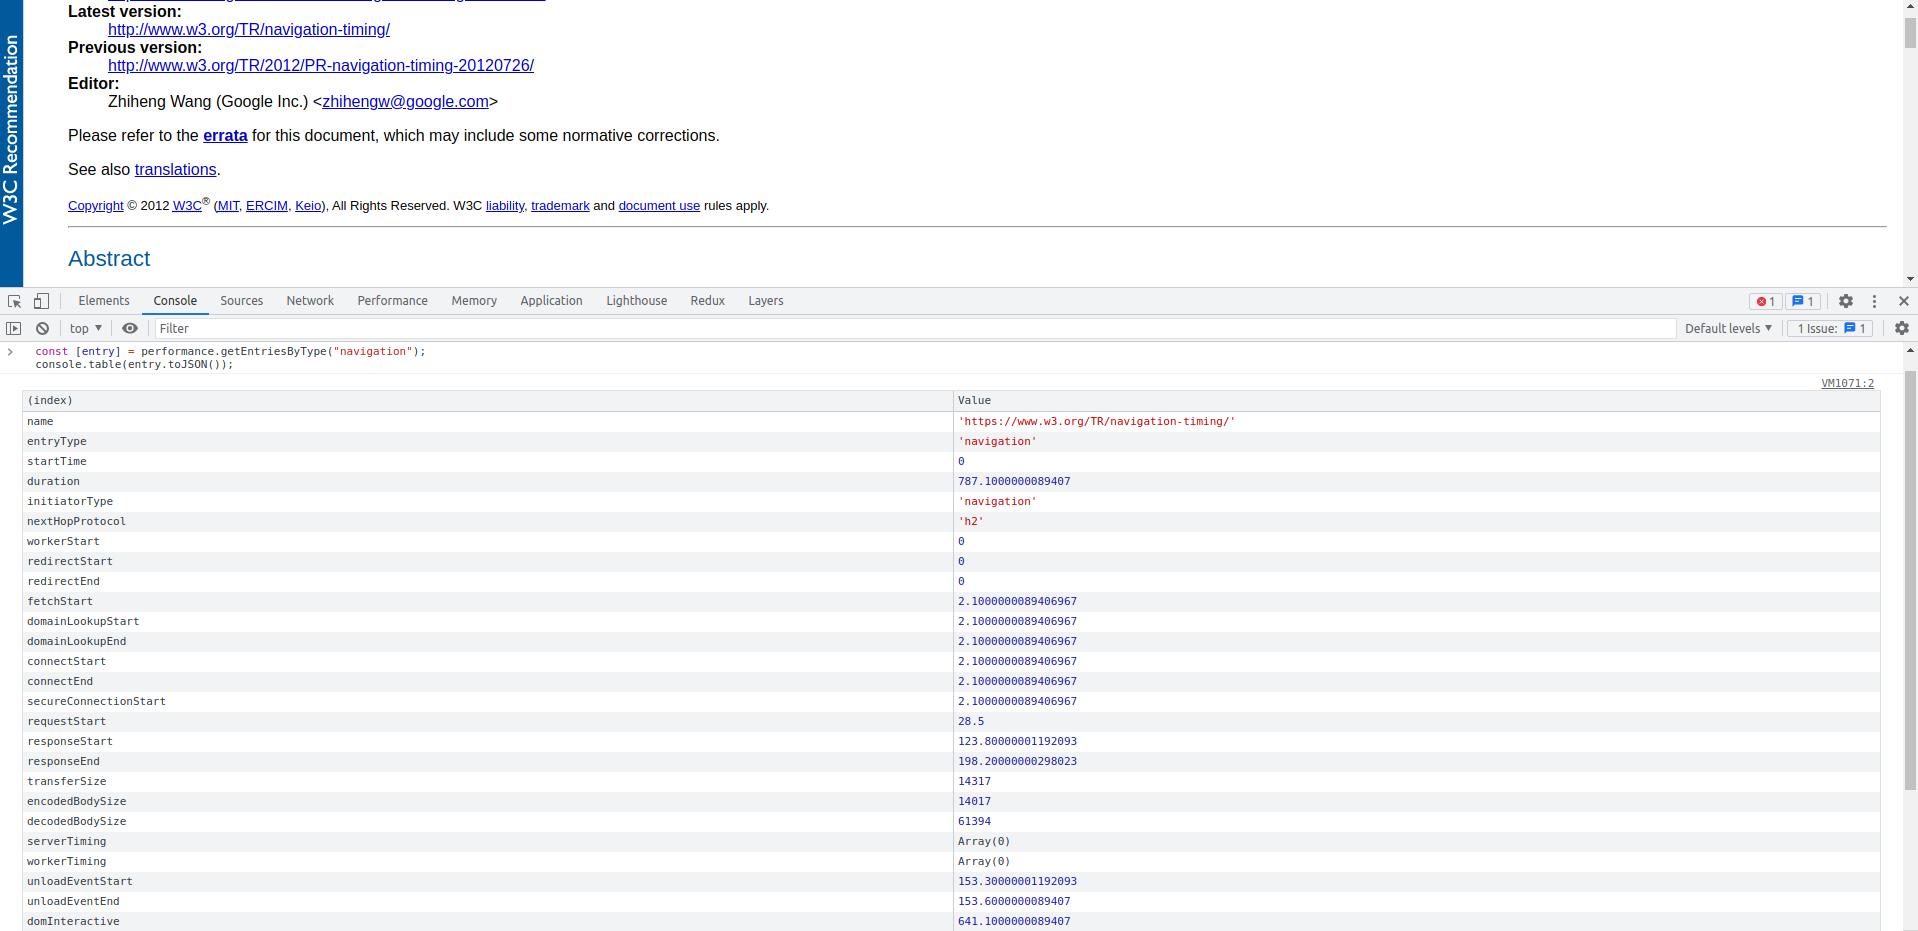 A screenshot of Chrome Dev Tools showing performance information